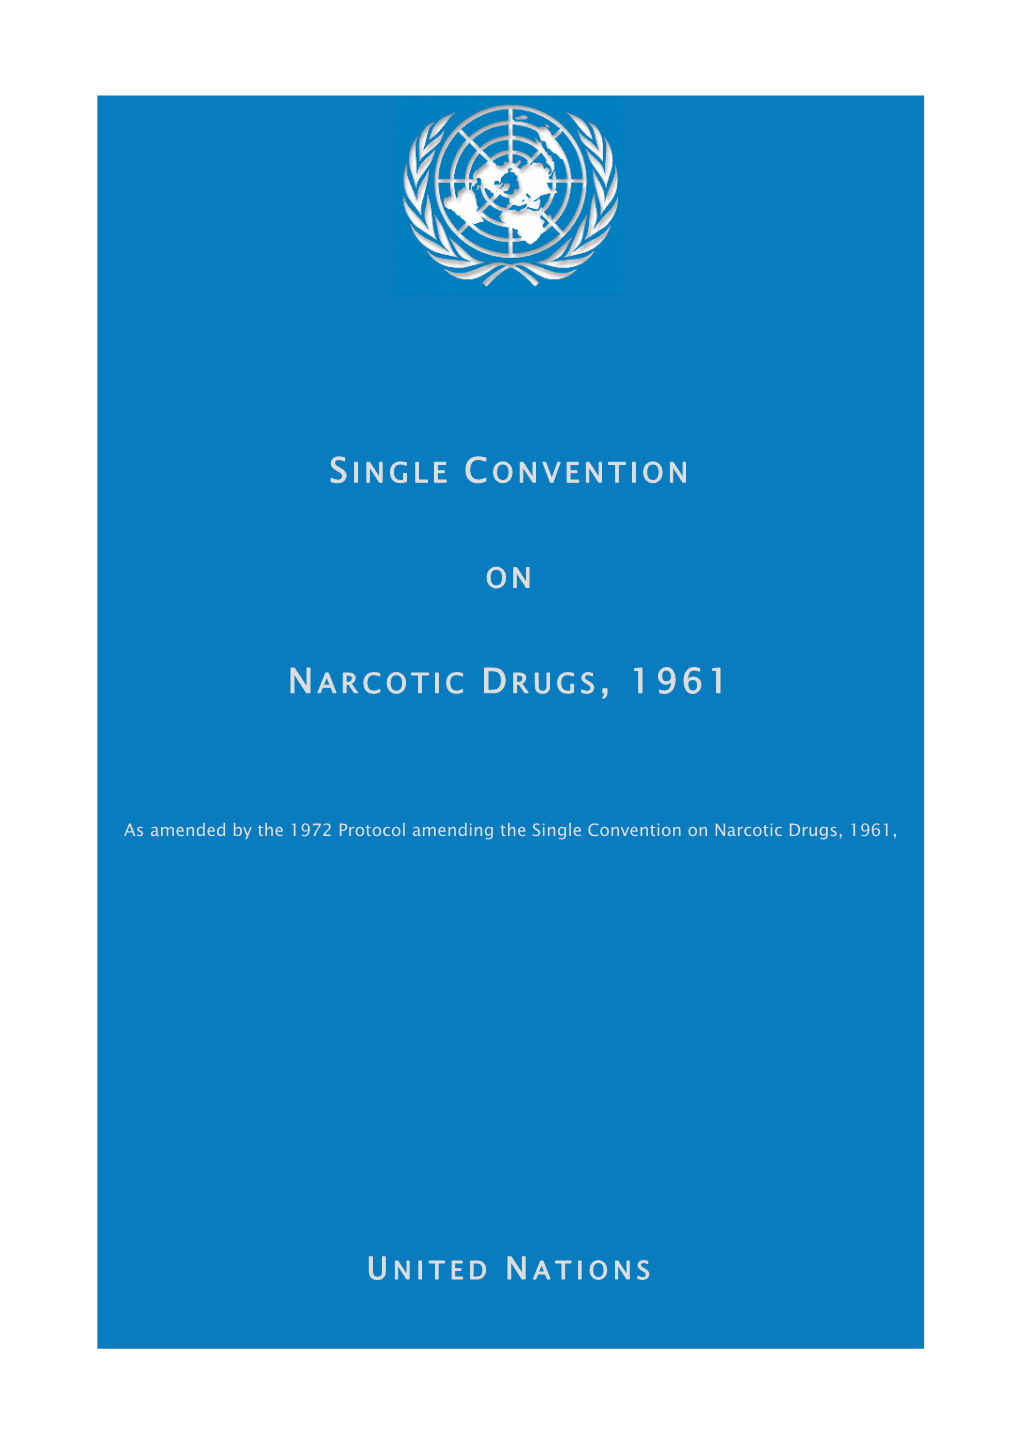 Single Convention on Narcotic Drugs, 1961